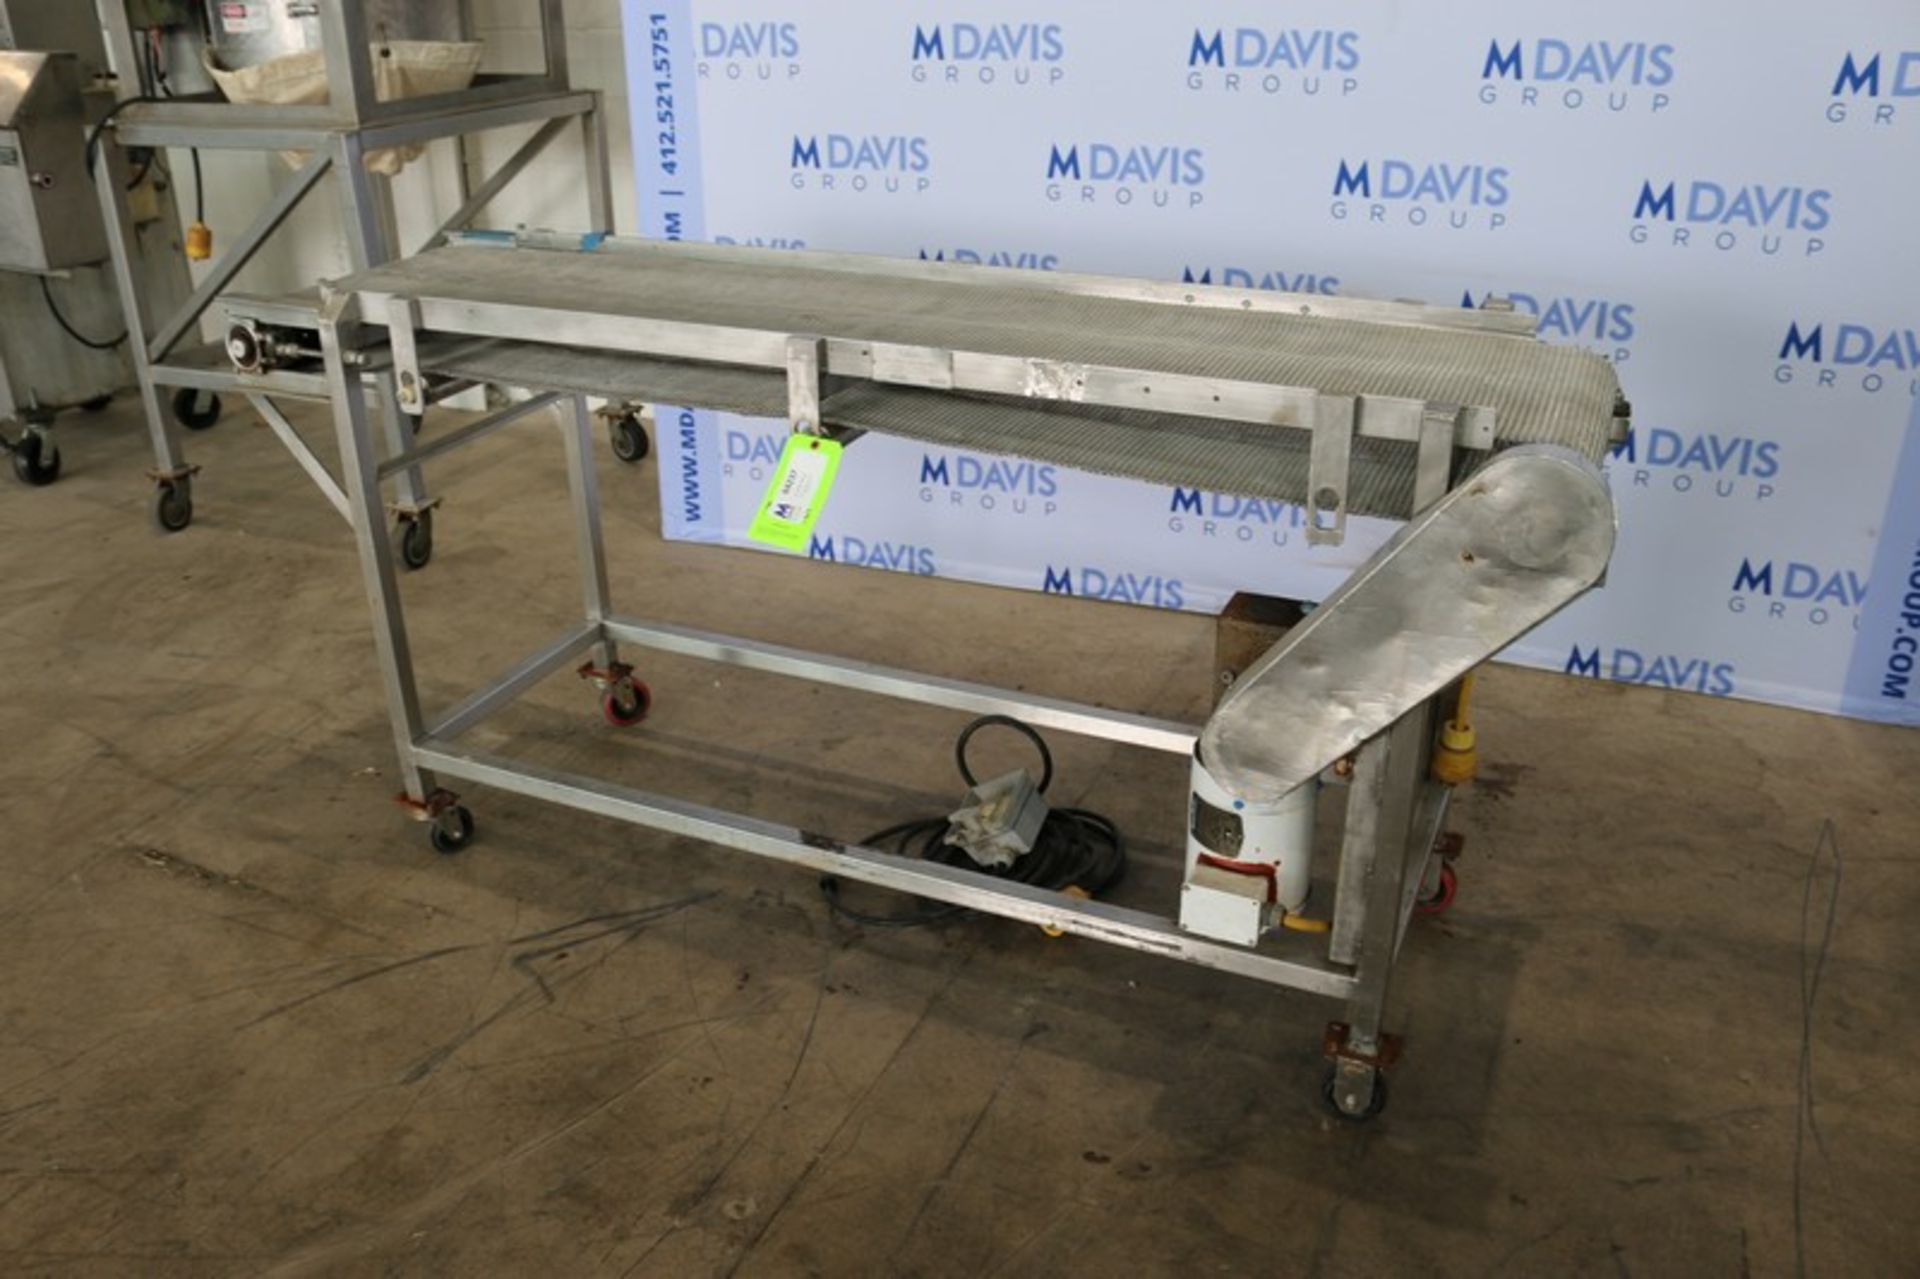 Robins Straight Section of S/S Mesh Conveyor,M/N 67, S/N 79230, with Baldor 1/2 hp Motor, Mounted on